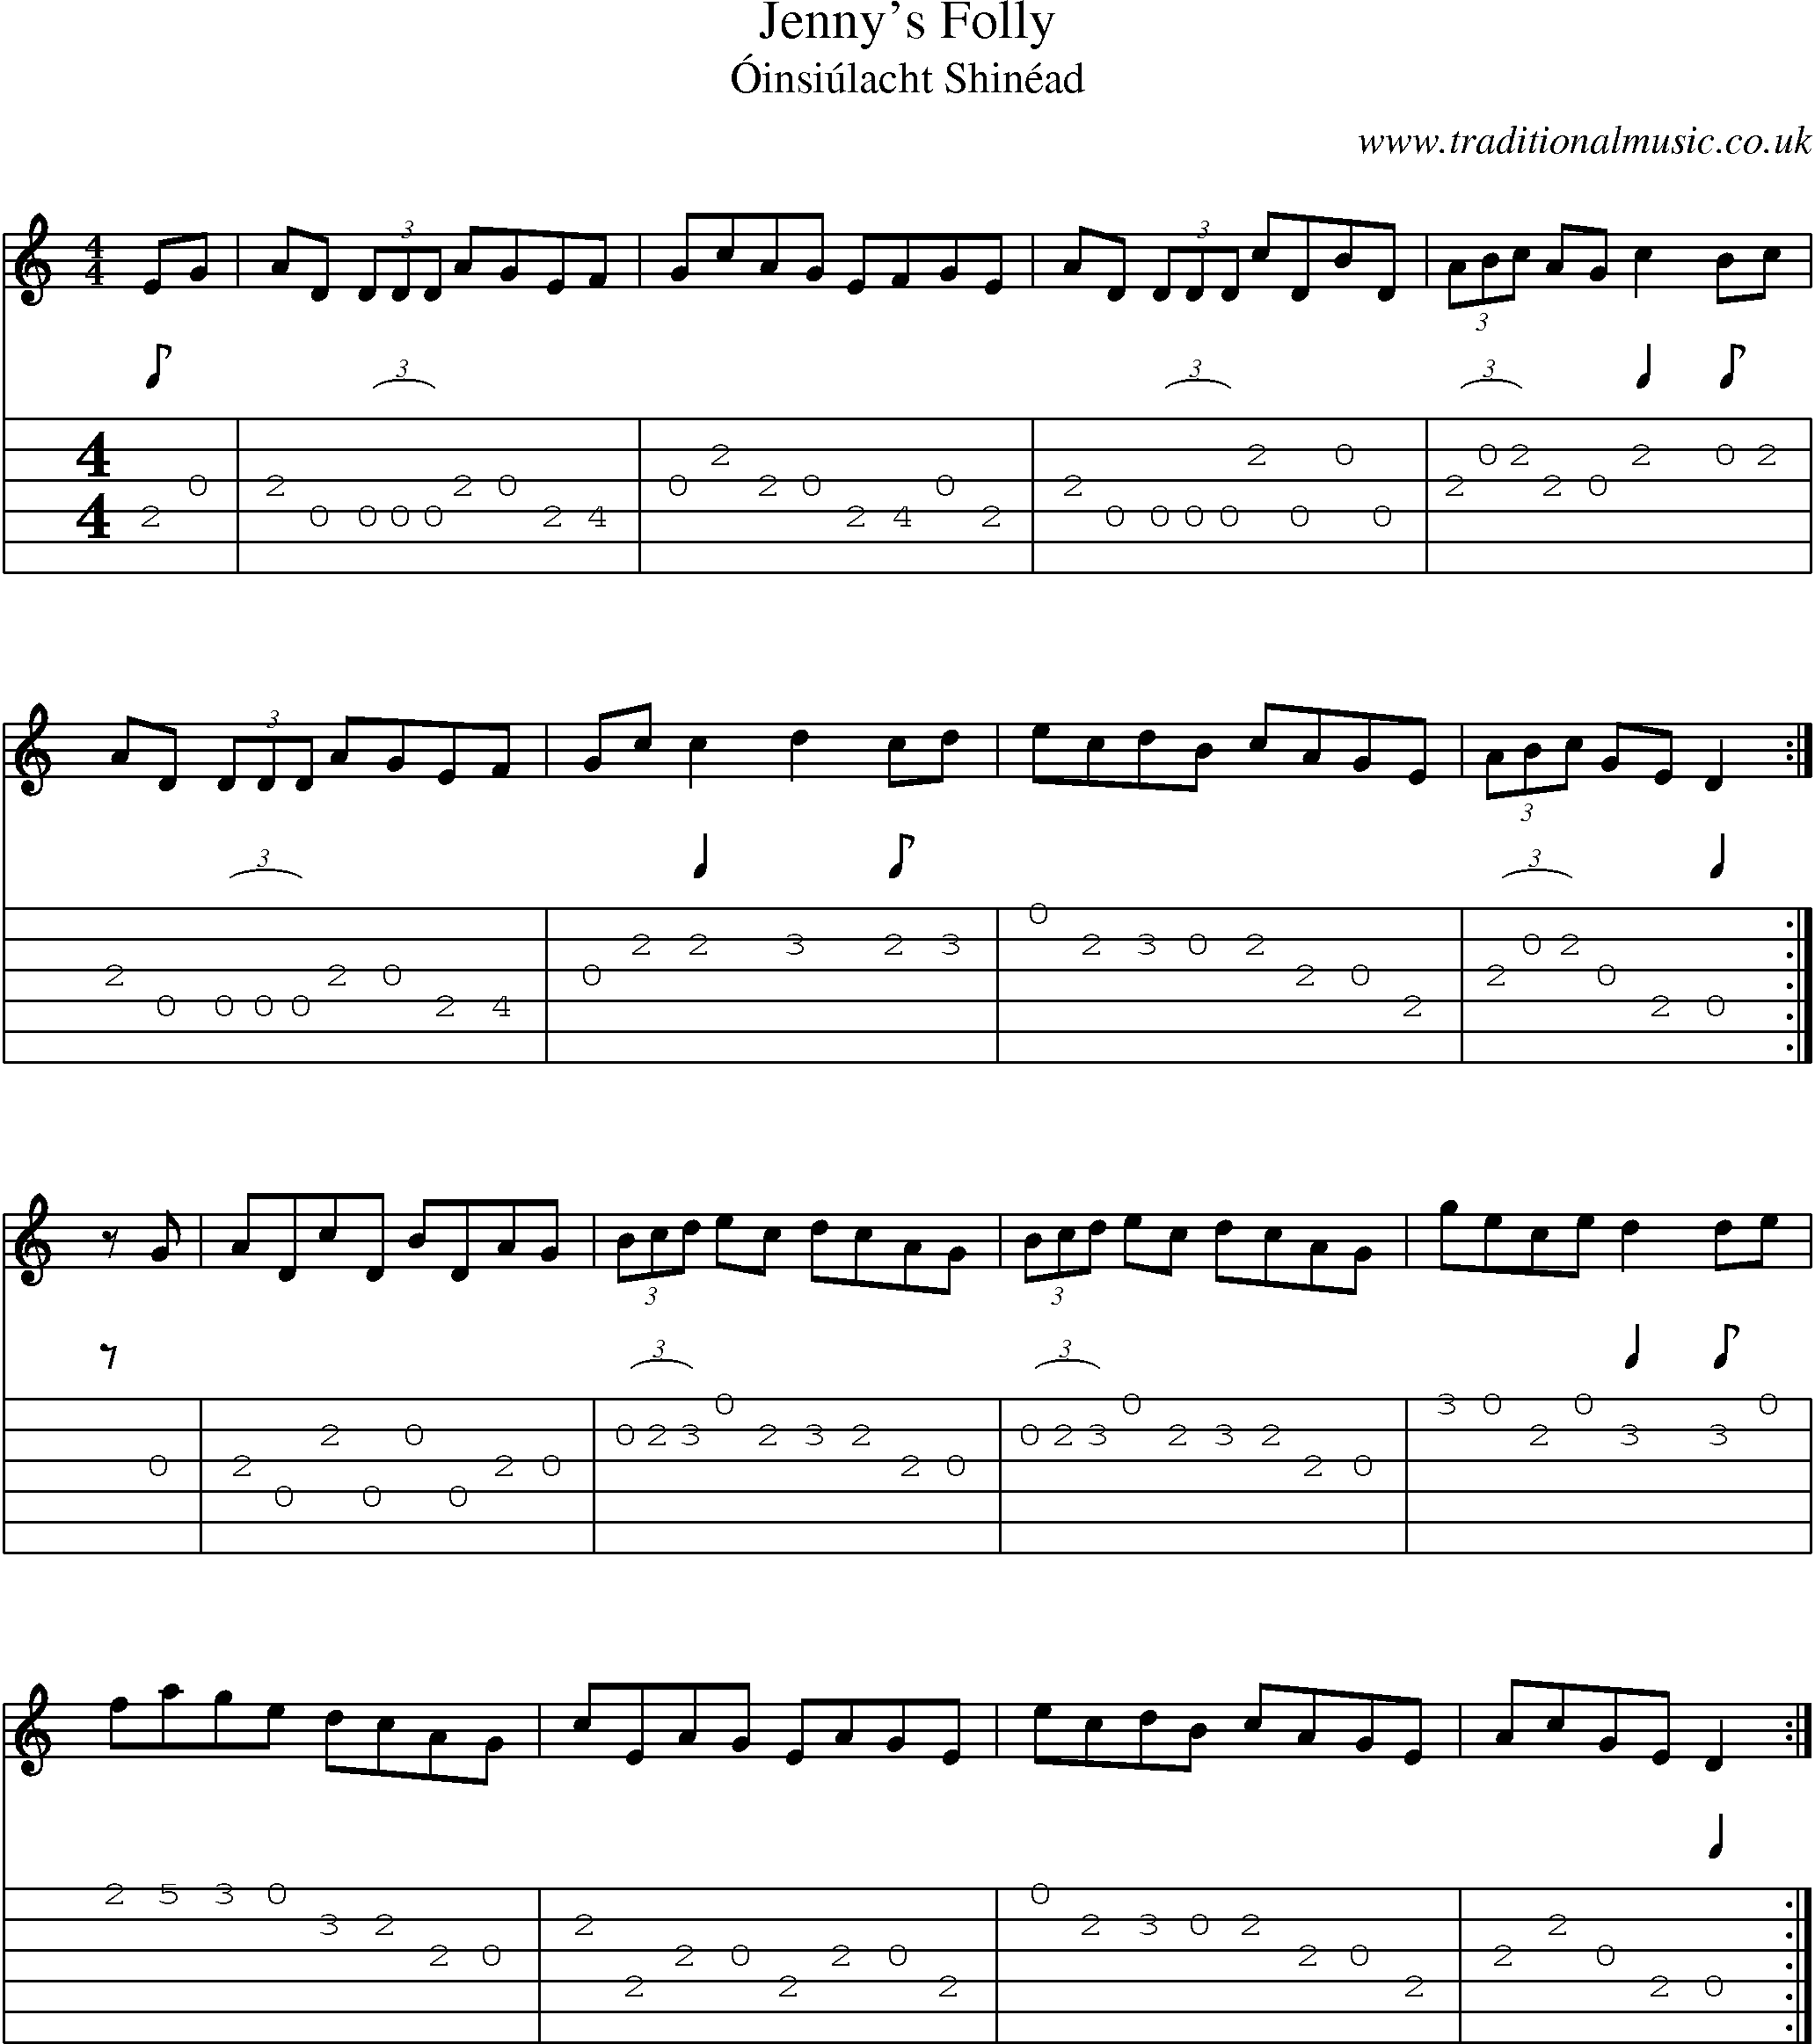 Music Score and Guitar Tabs for Jennys Folly